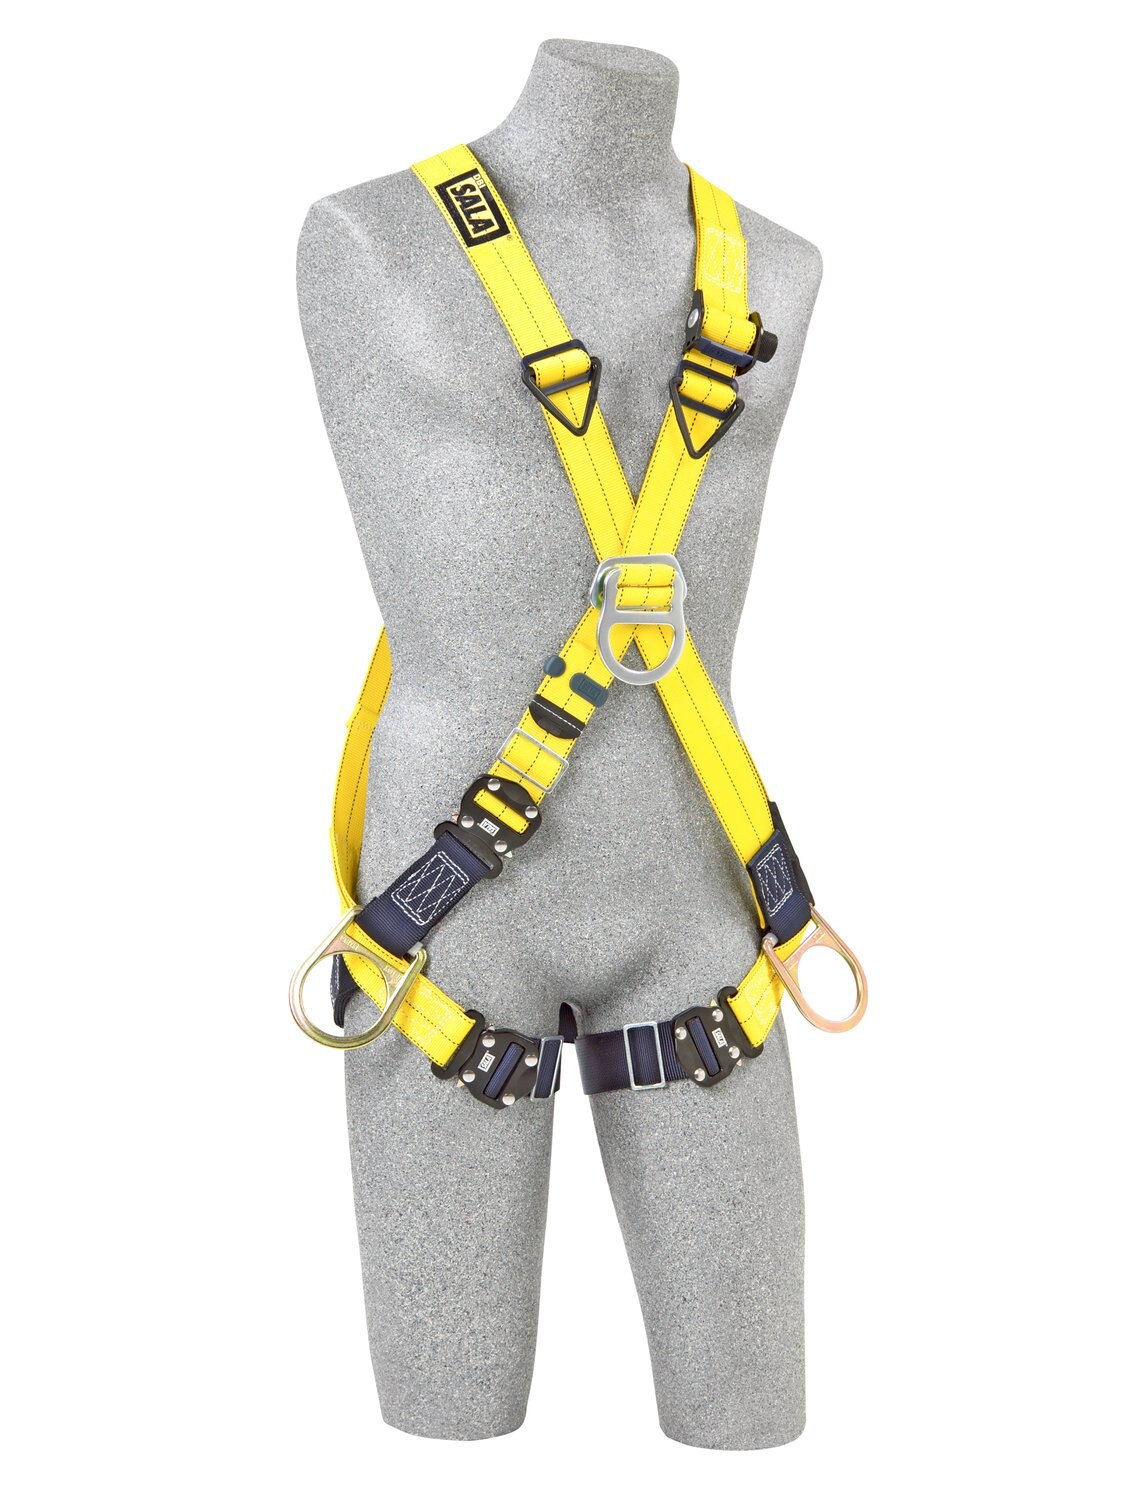 7012815750 - 3M DBI-SALA Delta Cross-Over Climbing/Positioning Safety Harness 1110726, Small